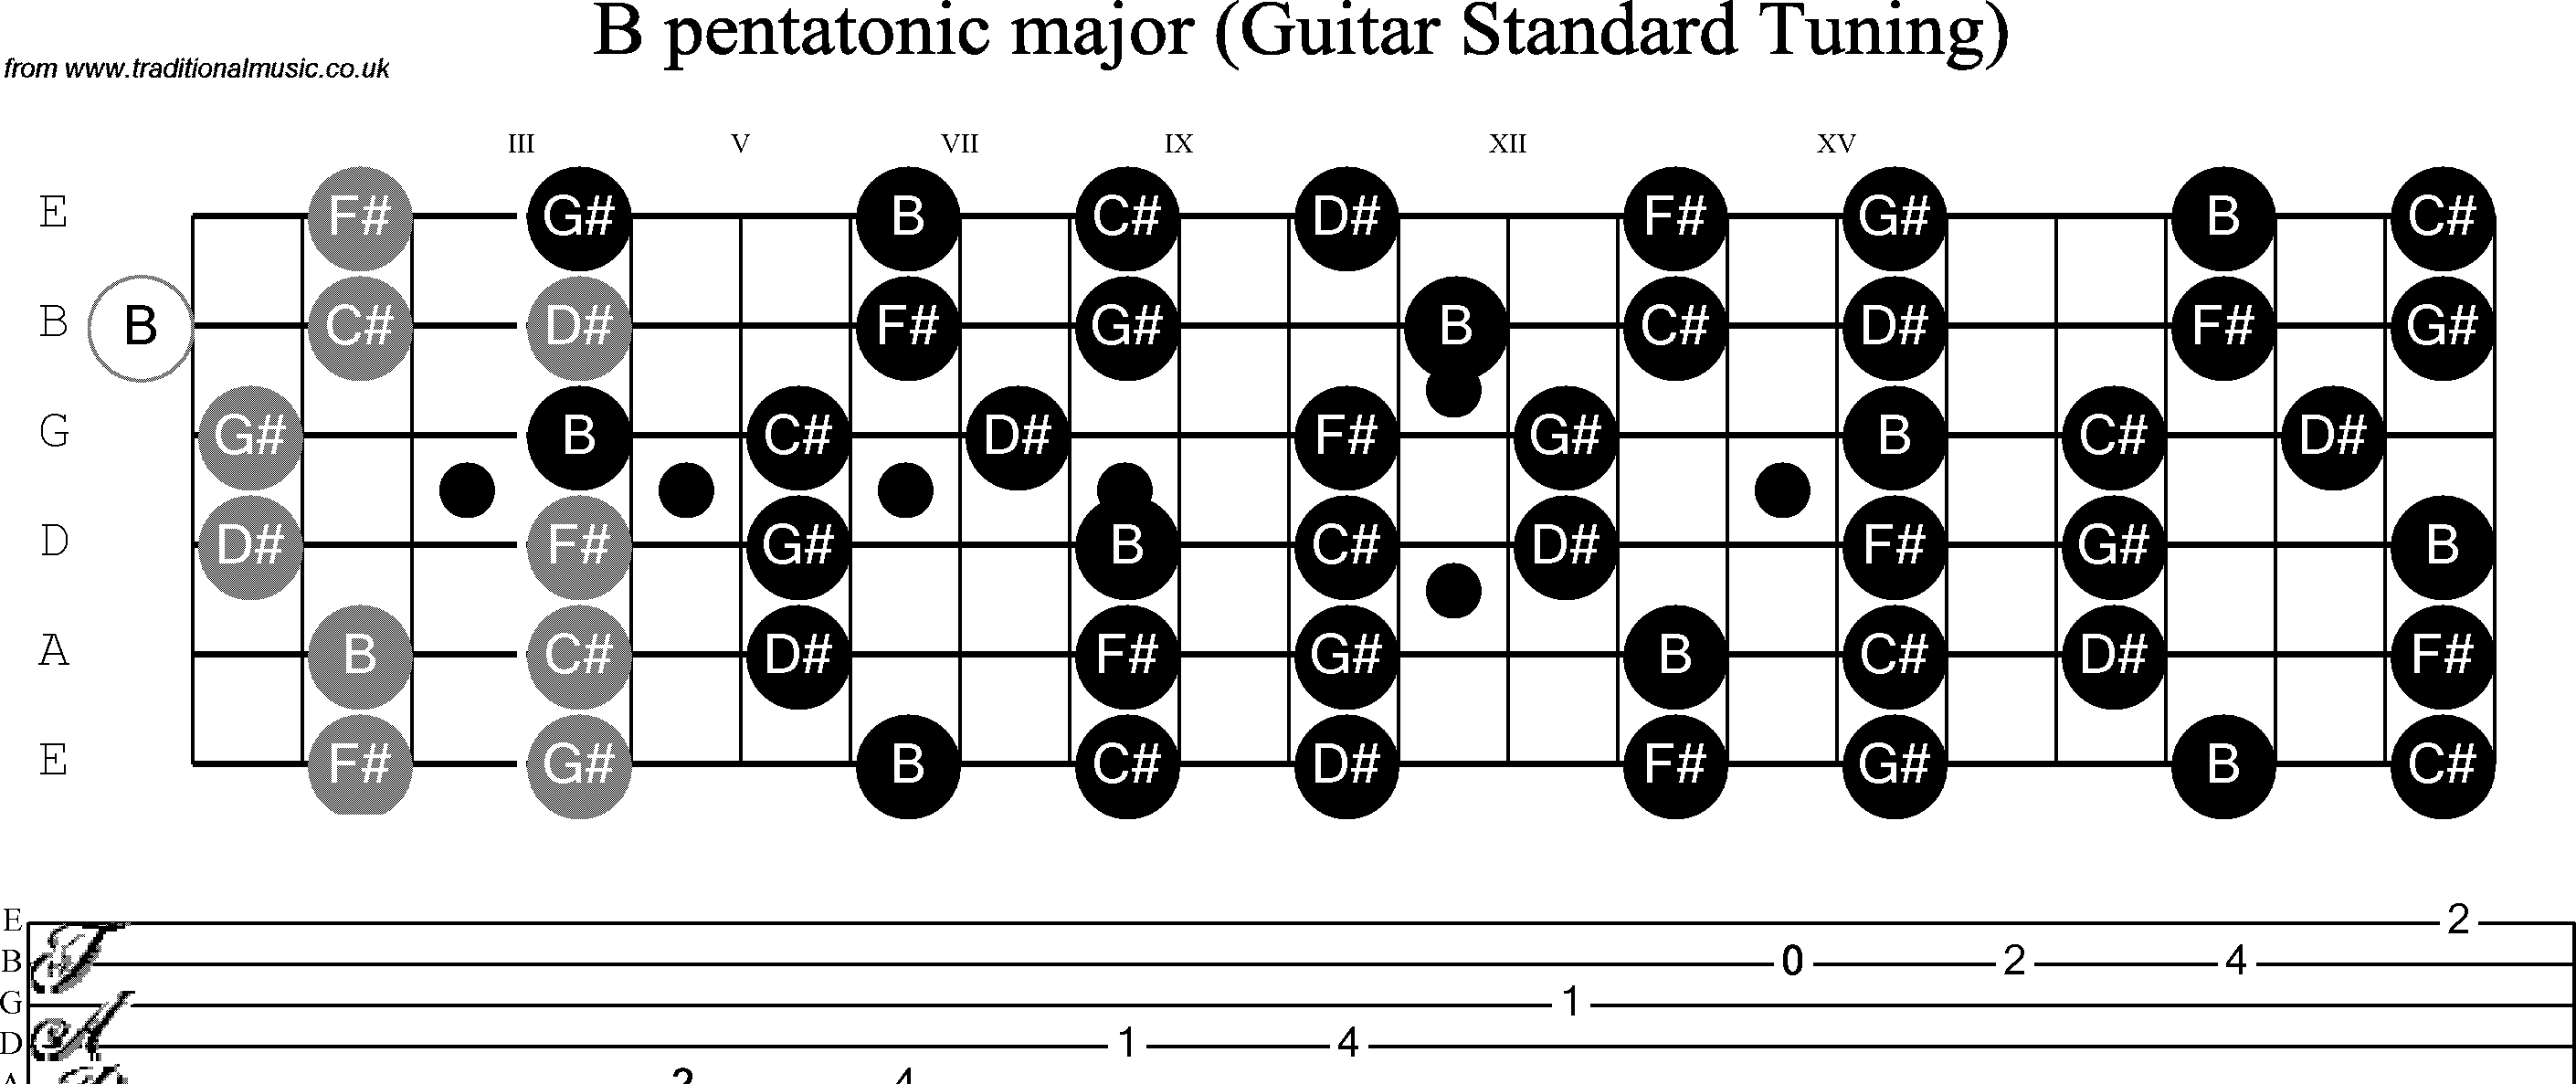 Scale, stave and neck diagram for Guitar: B Pentatonic